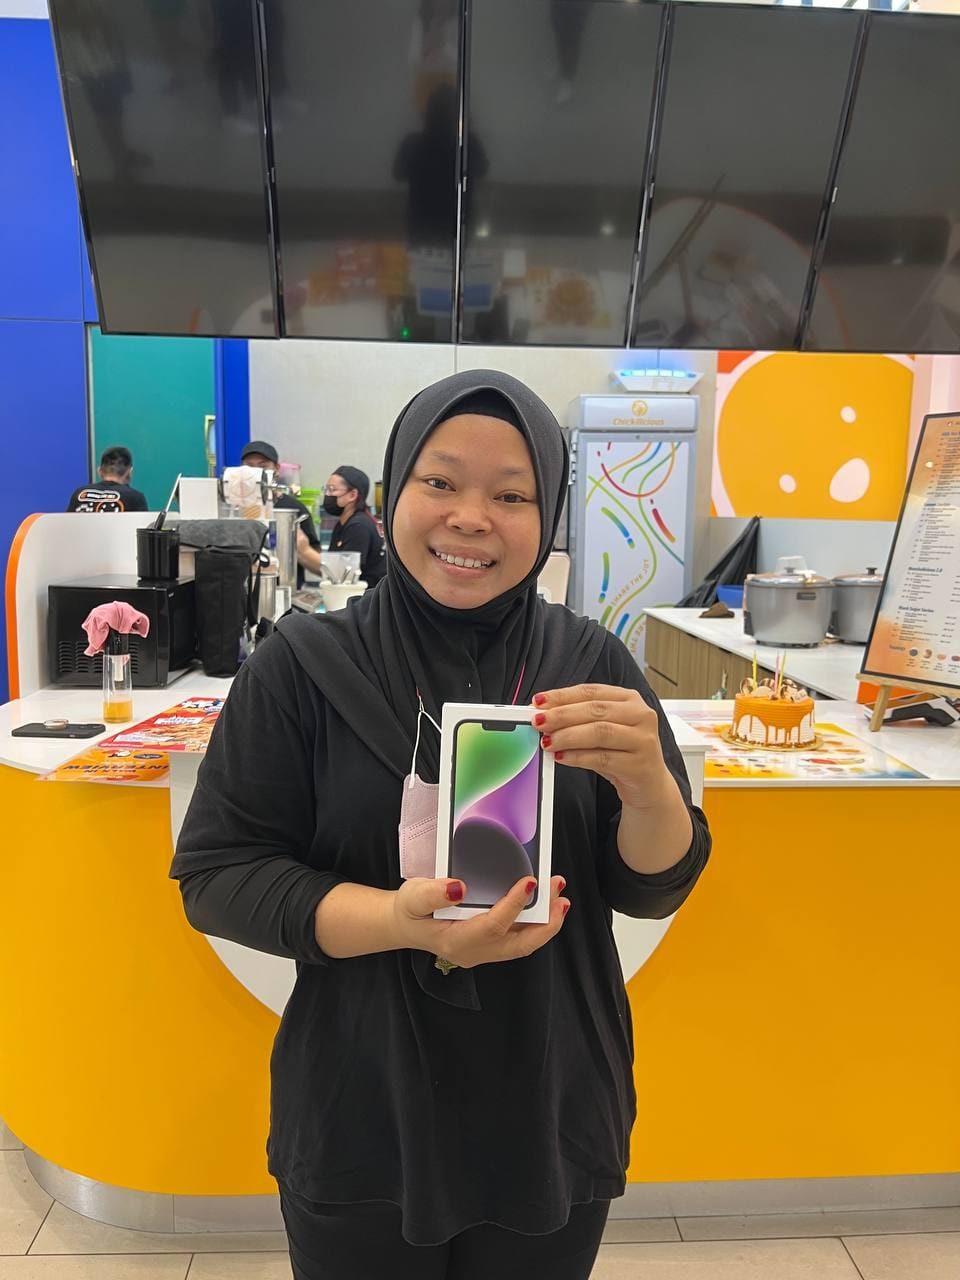 M'sian chicken restaurant boss gifts employee of 8 years an iphone 14 for her birthday